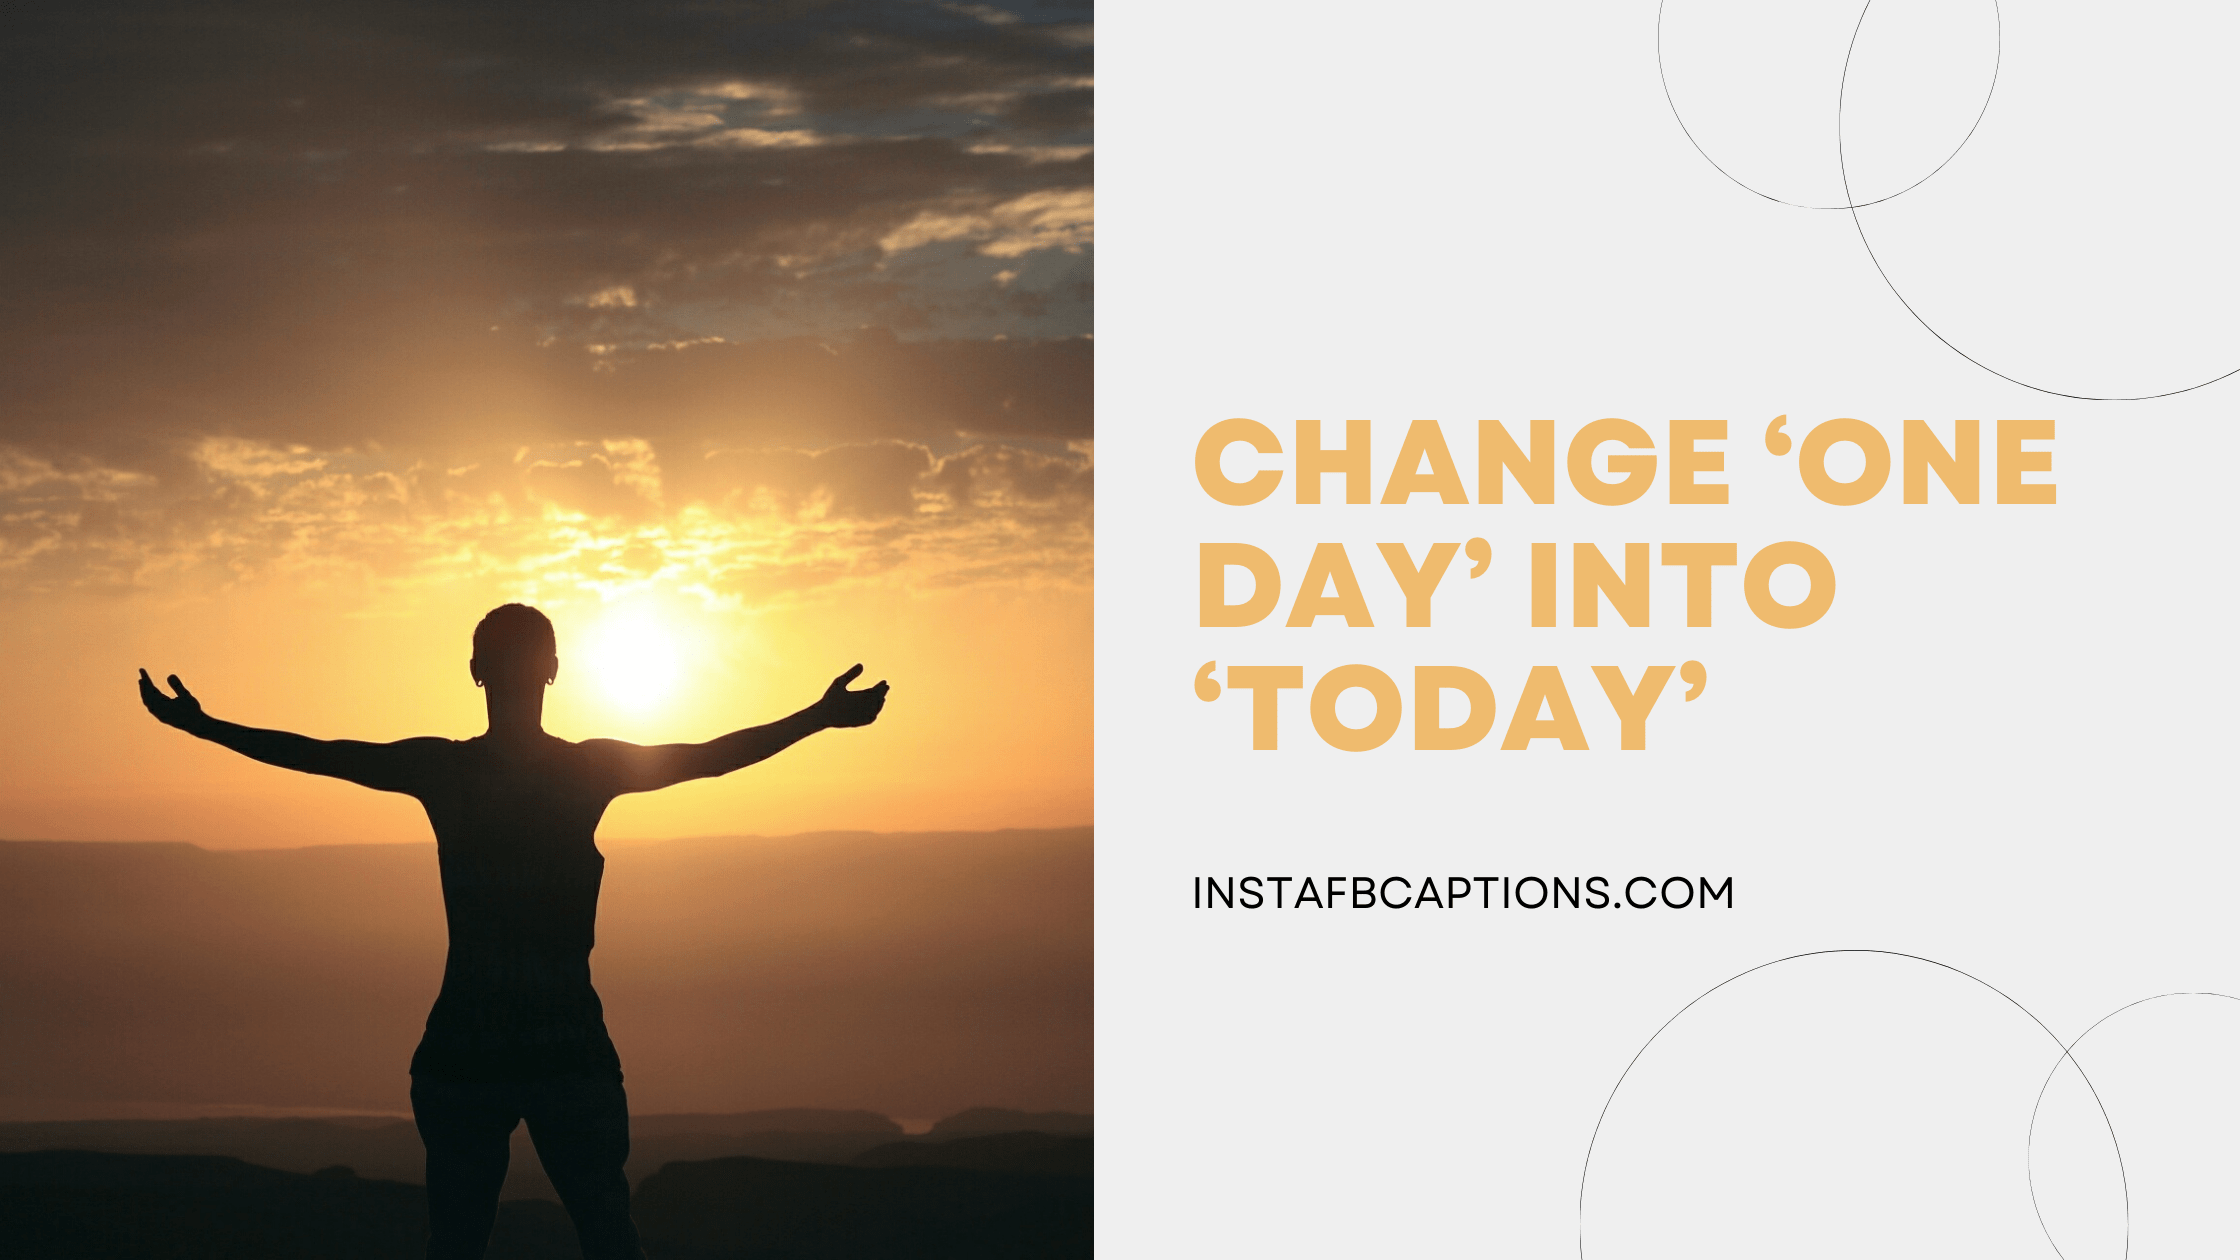 Change ‘ONE DAY’ into ‘TODAY’ attitude captions for instagram - Positive Attitude Captions - 155+ Trending Instagram Attitude Captions For Boys And Girls